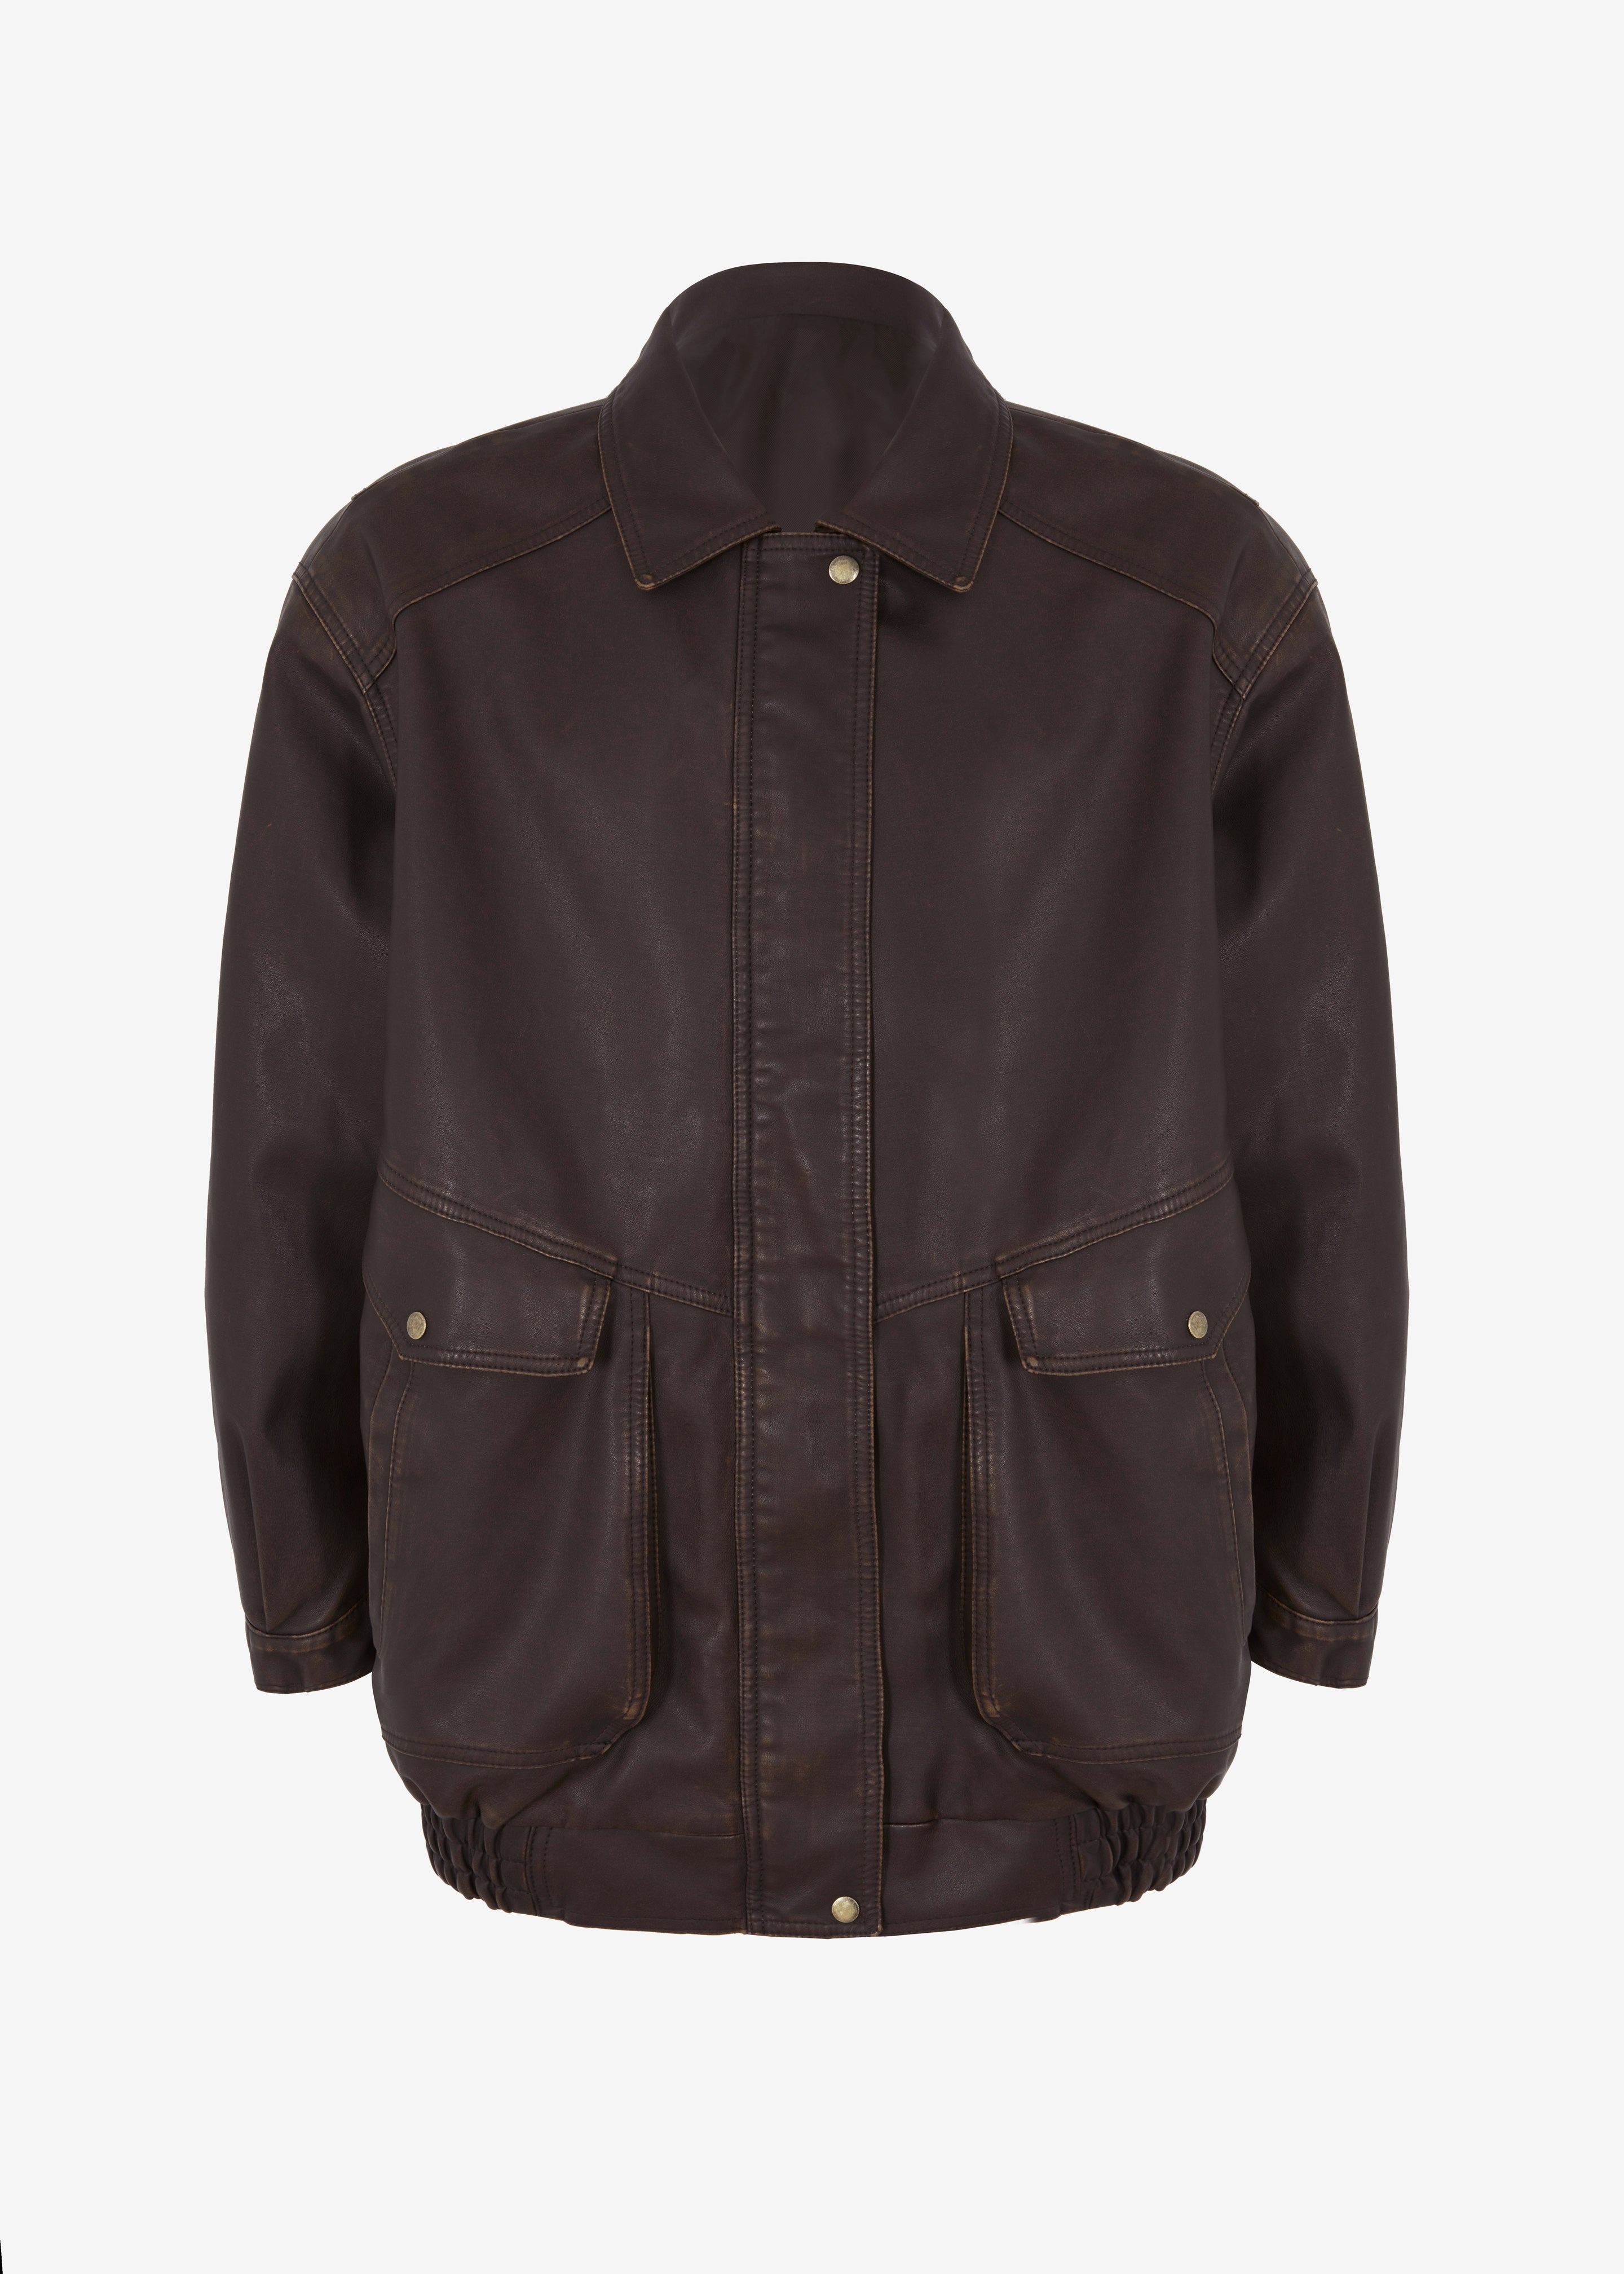 Cardiff Oversized Faux Leather Jacket - Brown - 9